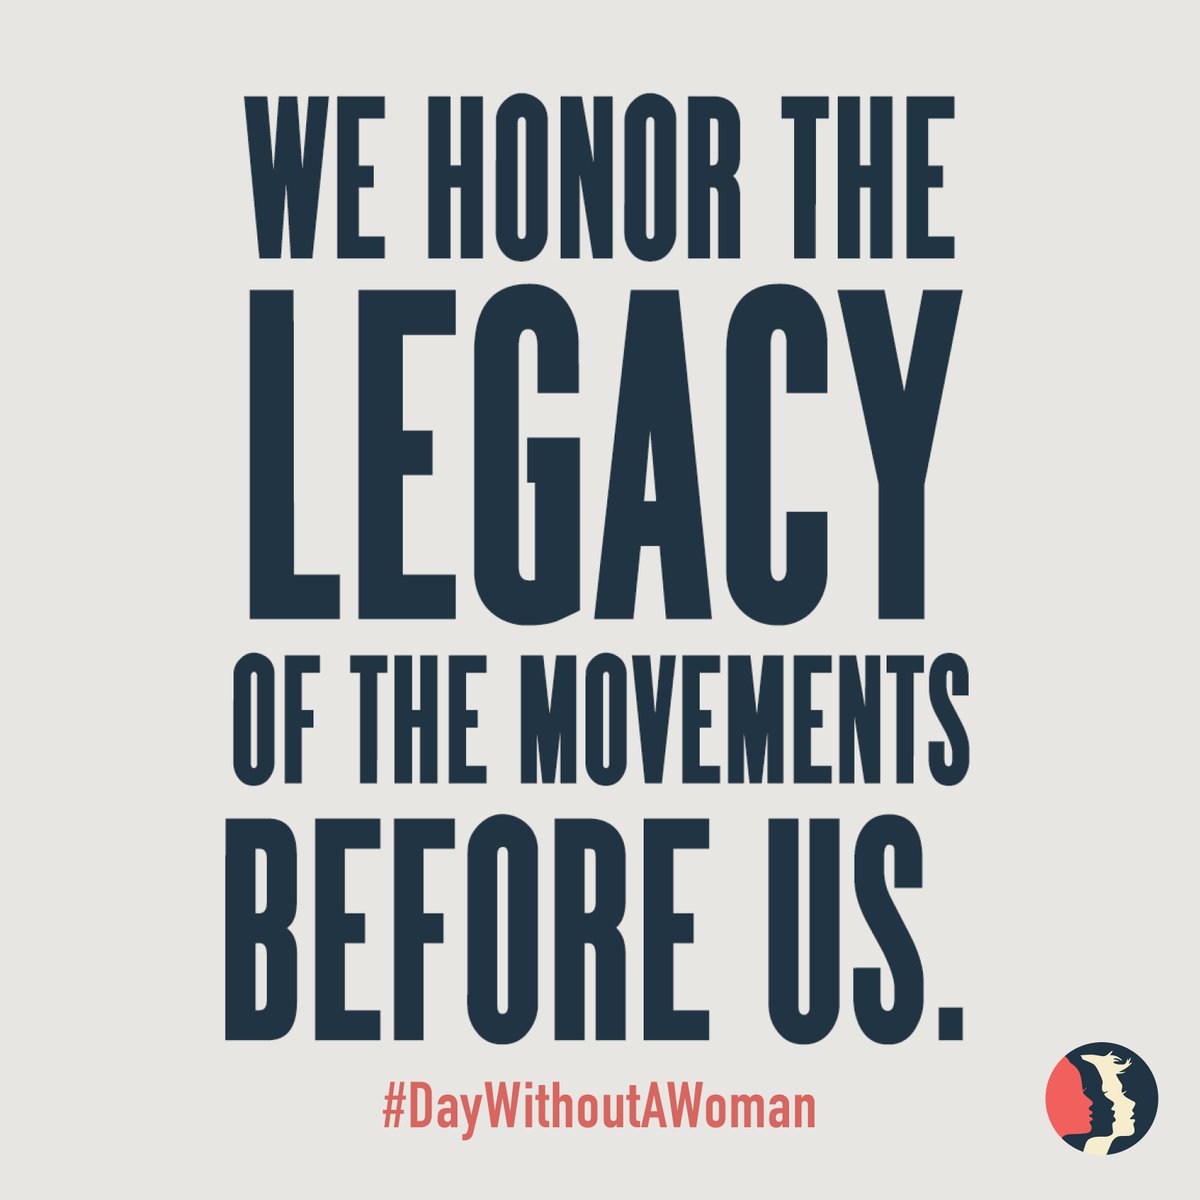 #DayWithoutAWoman is happening in 9 days. We'll strike for gender justice in media, free speech, #wageequality & ending #onlineabuse.